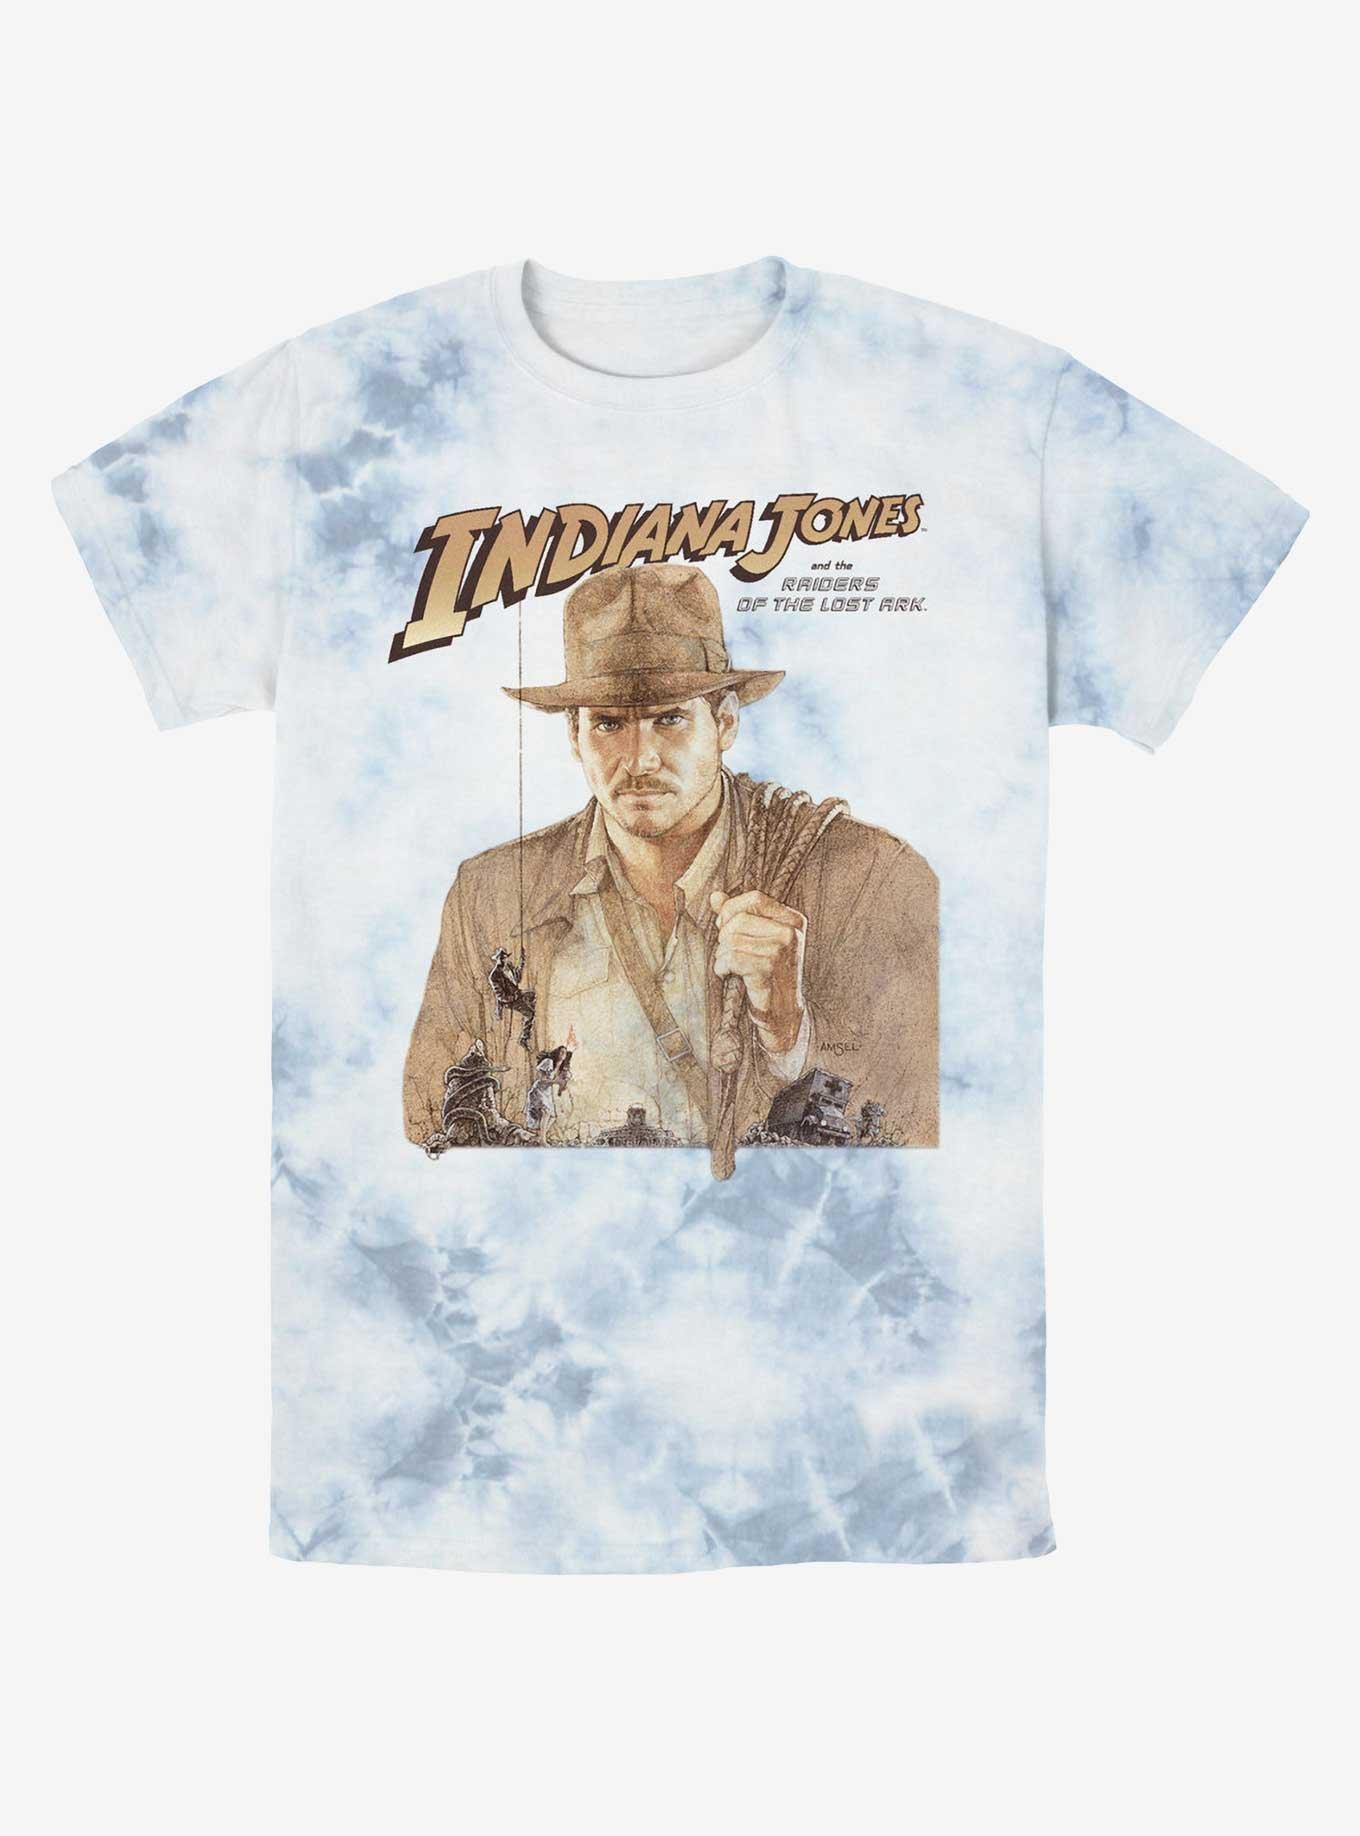 Indiana Jones and the Raiders of the Lost Ark Tie-Dye T-Shirt